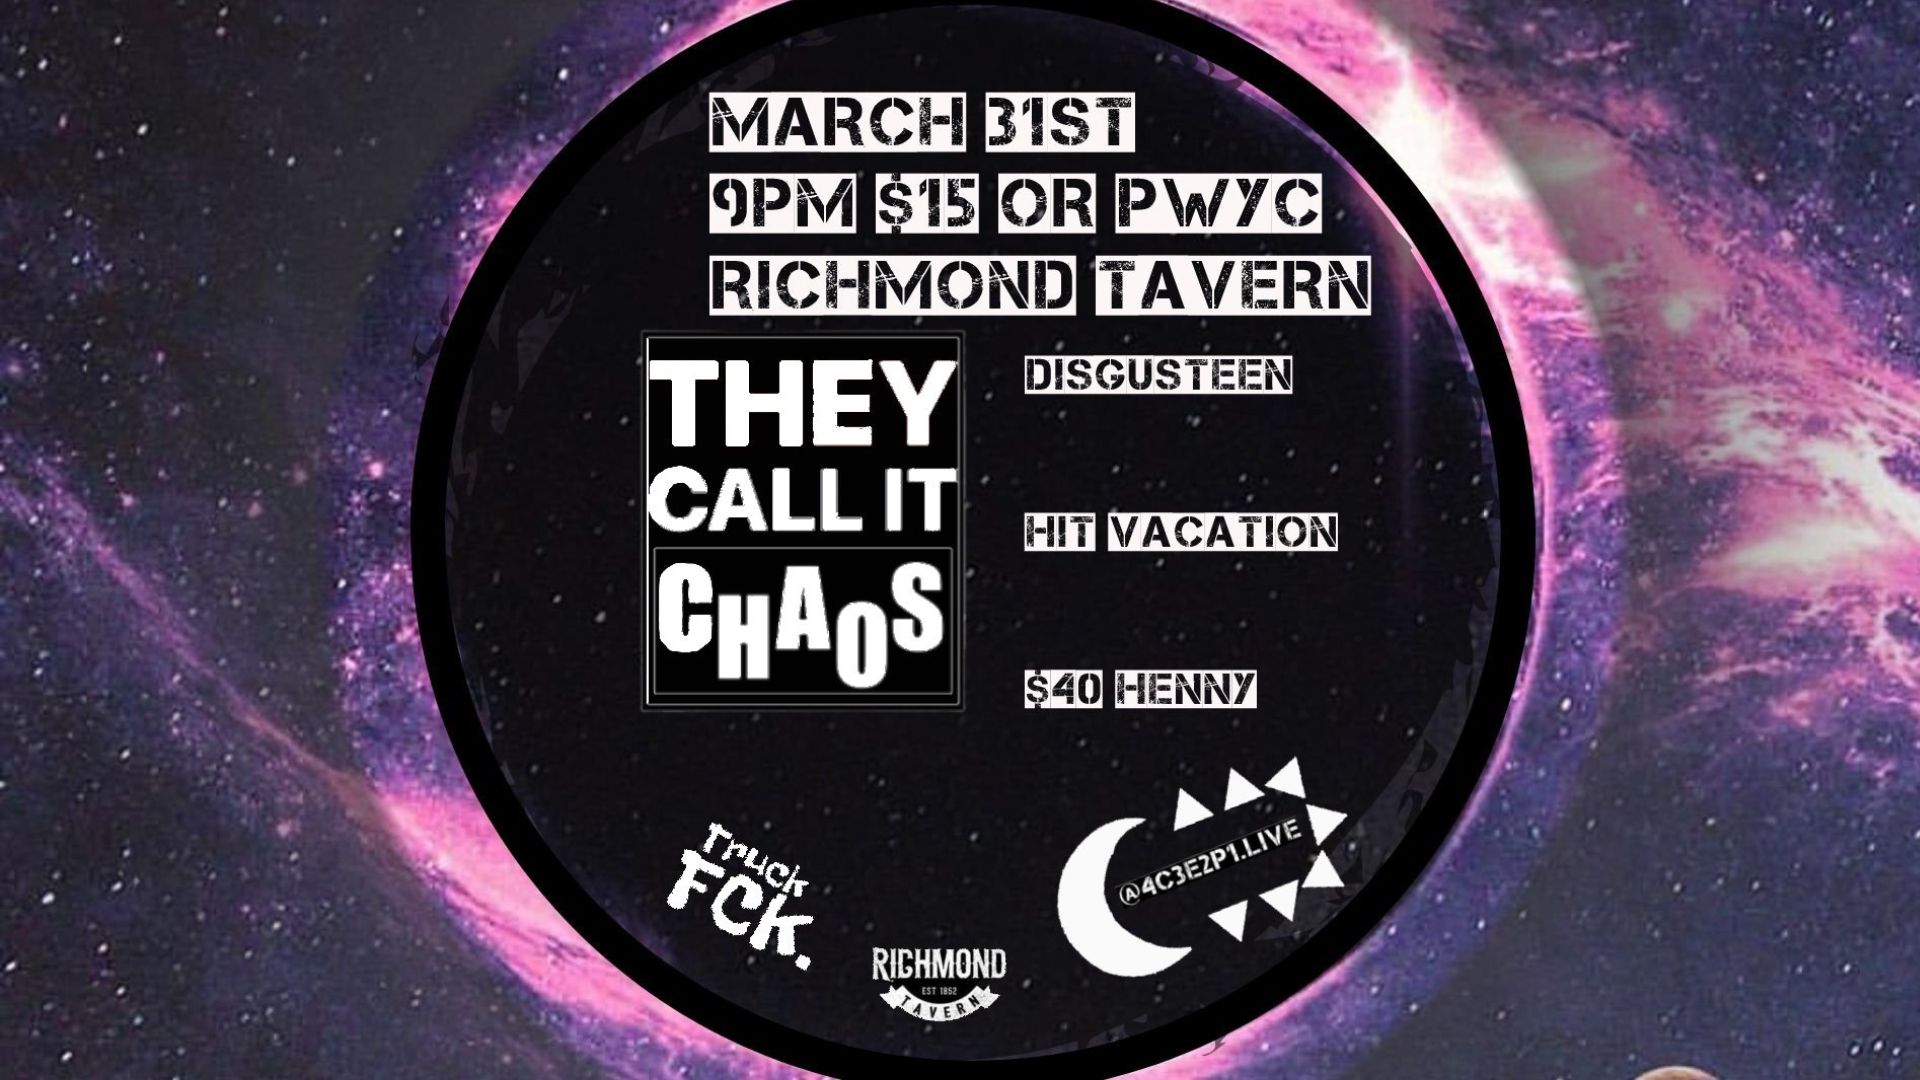 Truck Fck Mag Co-Host event WSG: They Call IT Chaos, Disgusteen: A Teenage Head Tribute, Hit Vacation & $40 Henny